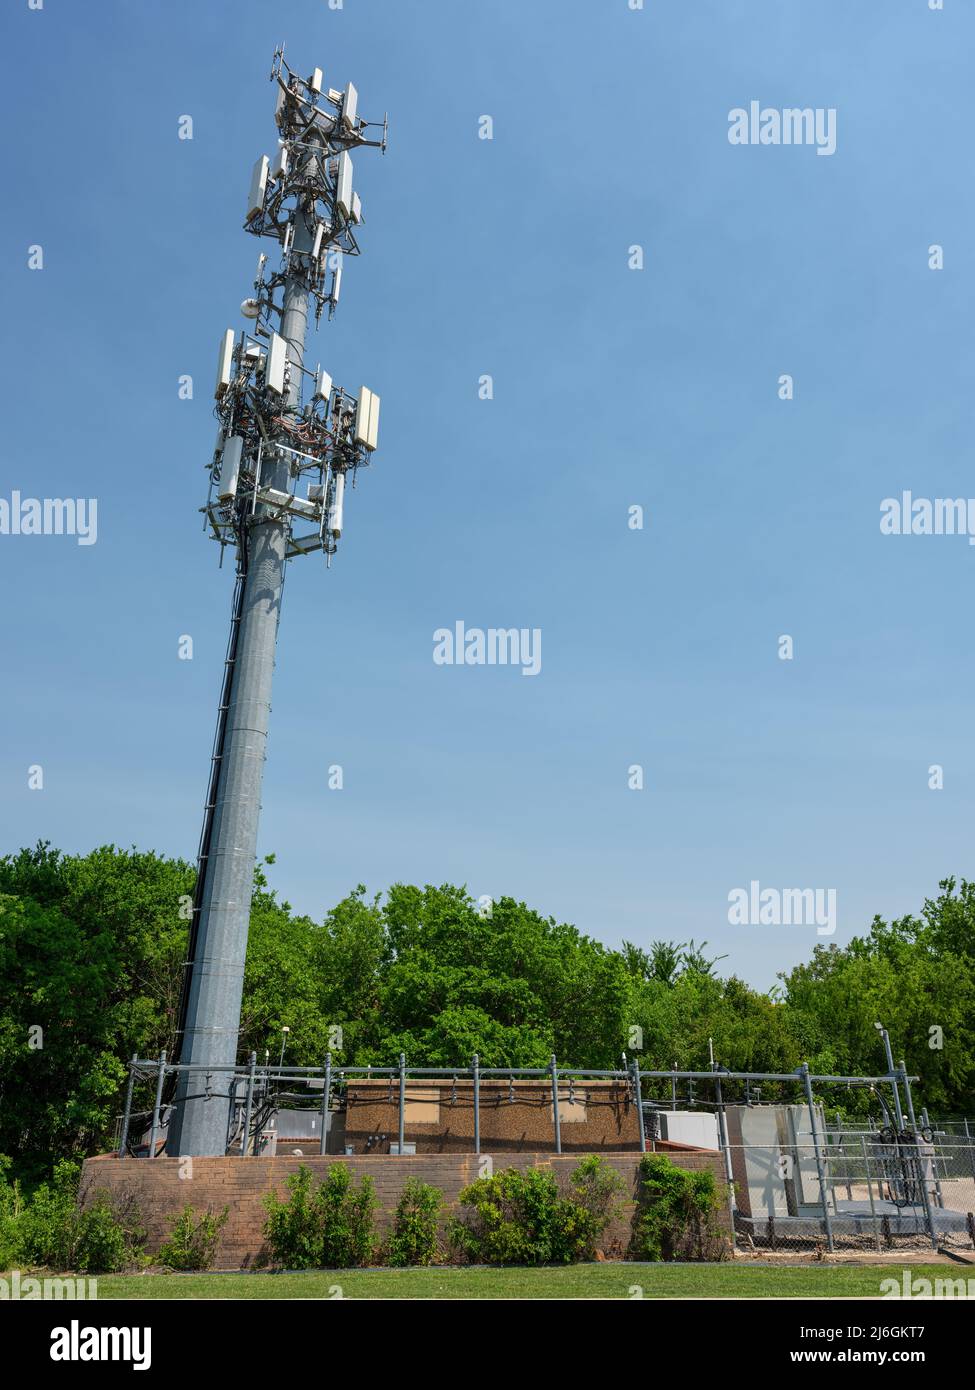 A cell tower and base transceiver station supplies 4G and 5G mobile broadband connections in suburban Fort Worth, Texas. Stock Photo